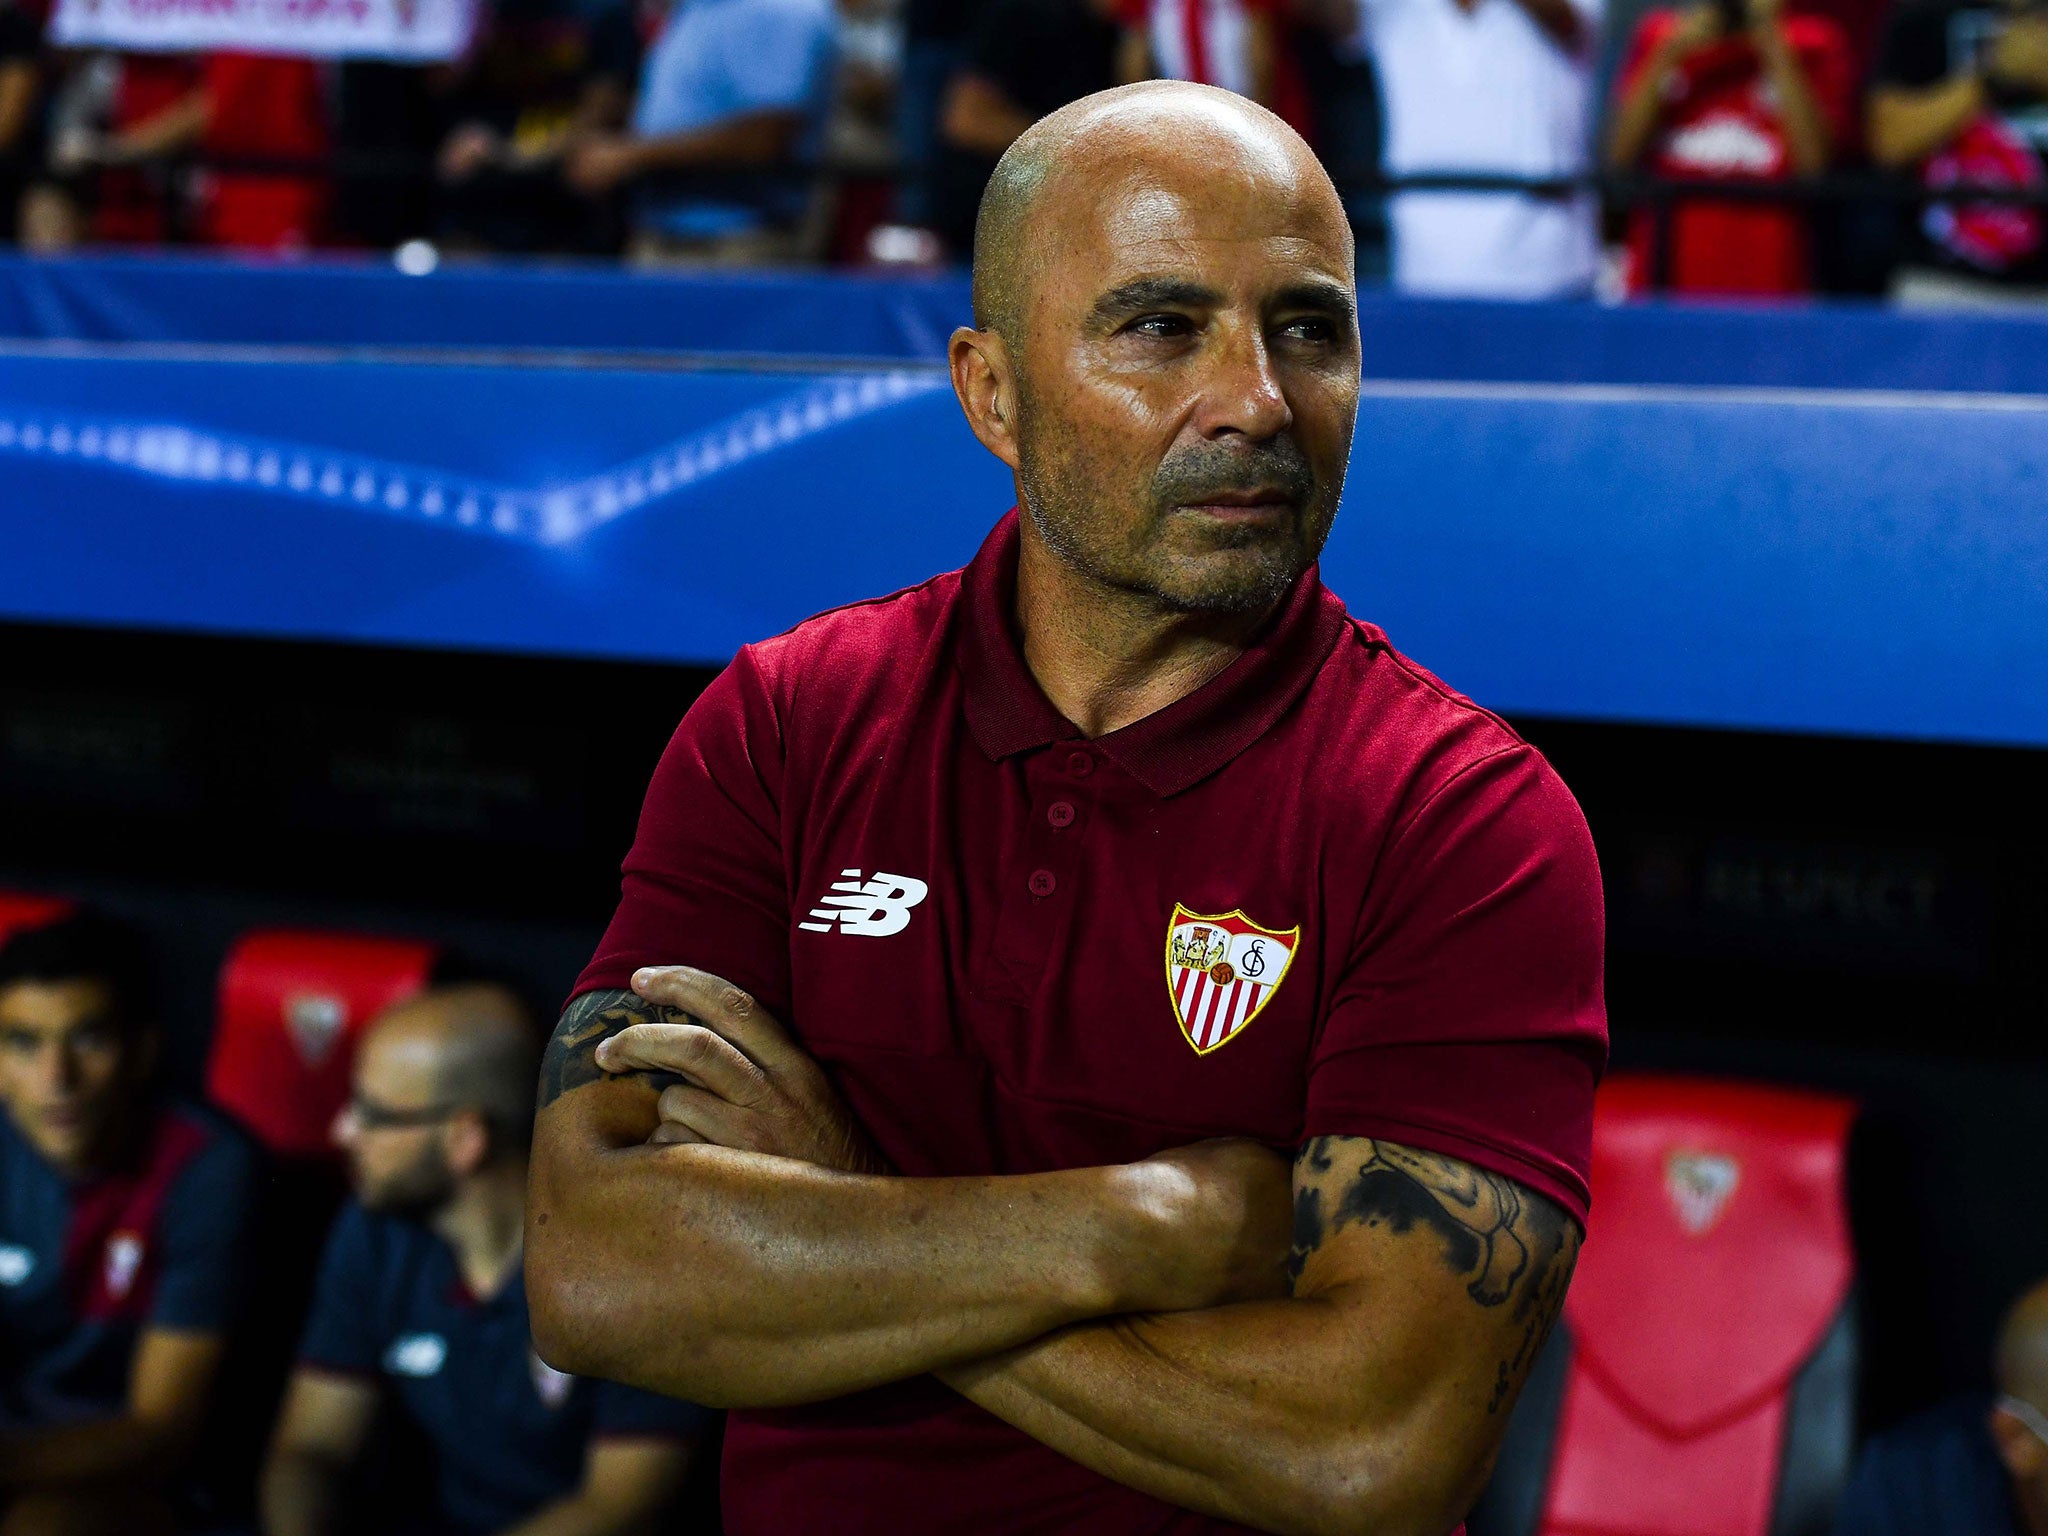 Jorge Sampaoli is the standout candidate to replace Luis Enrique at Barcelona